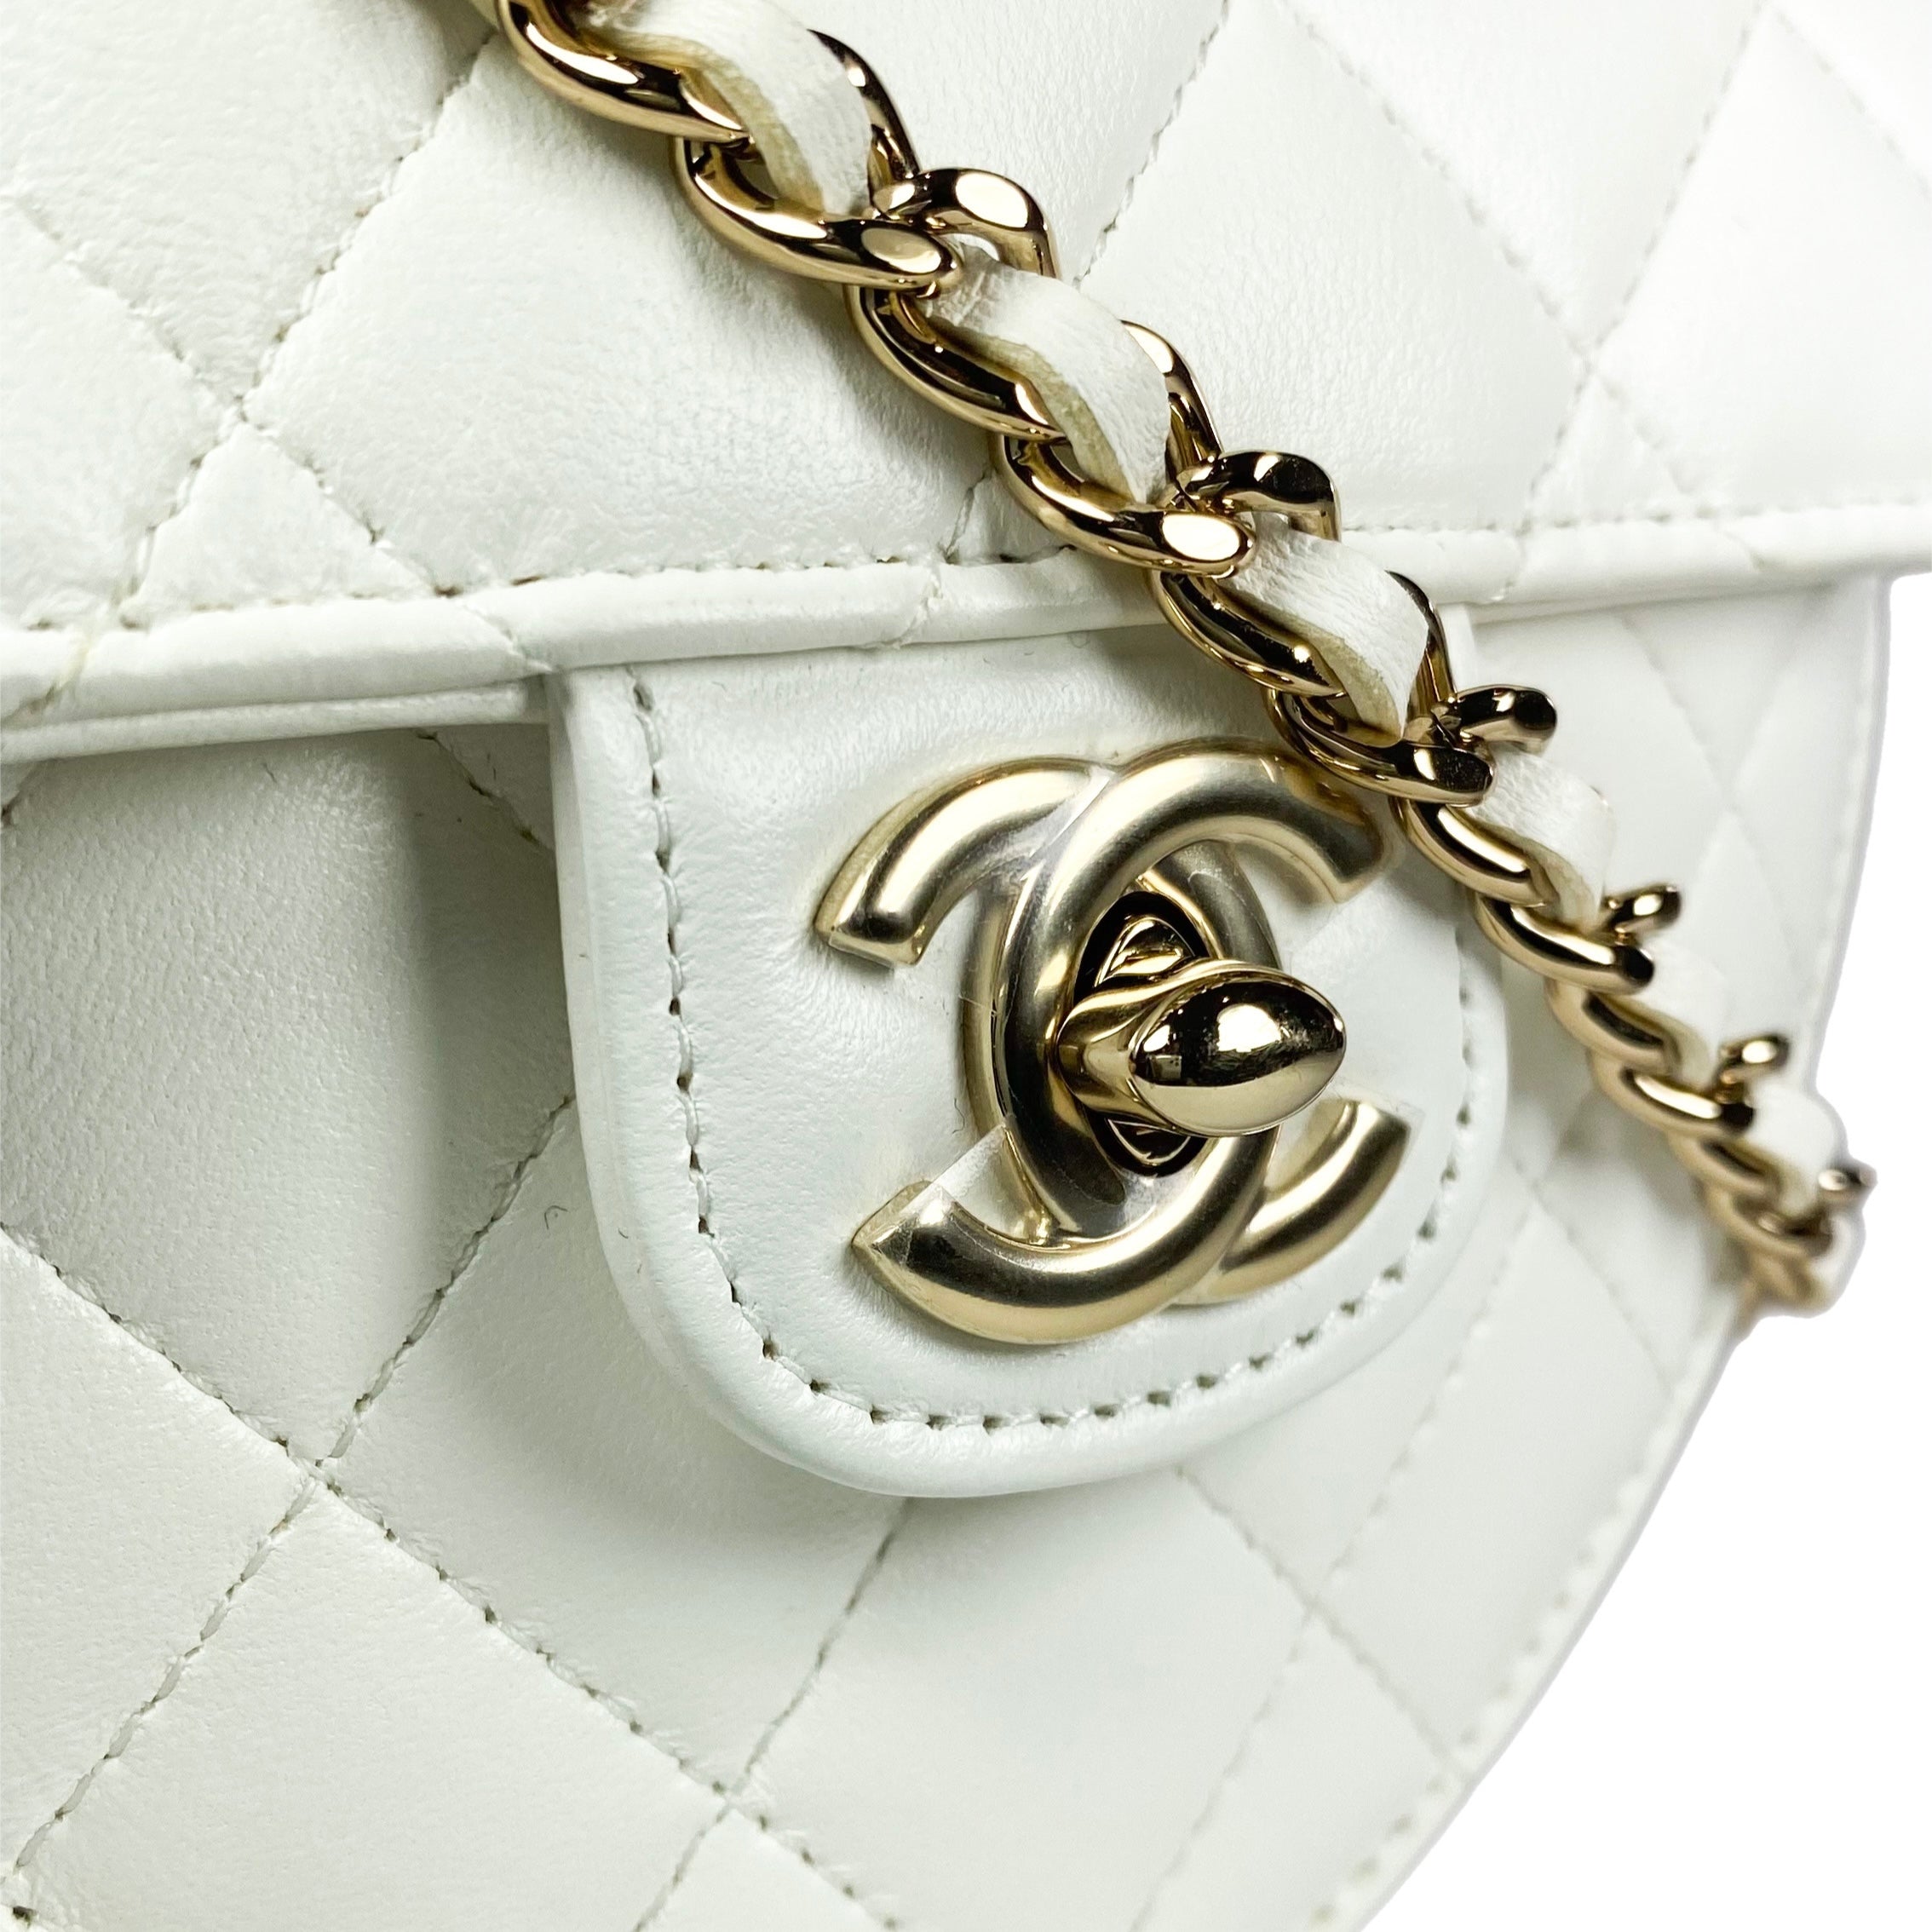 Chanel Black & Gold Quilted Leather Cc Chic Flap Bag, Never